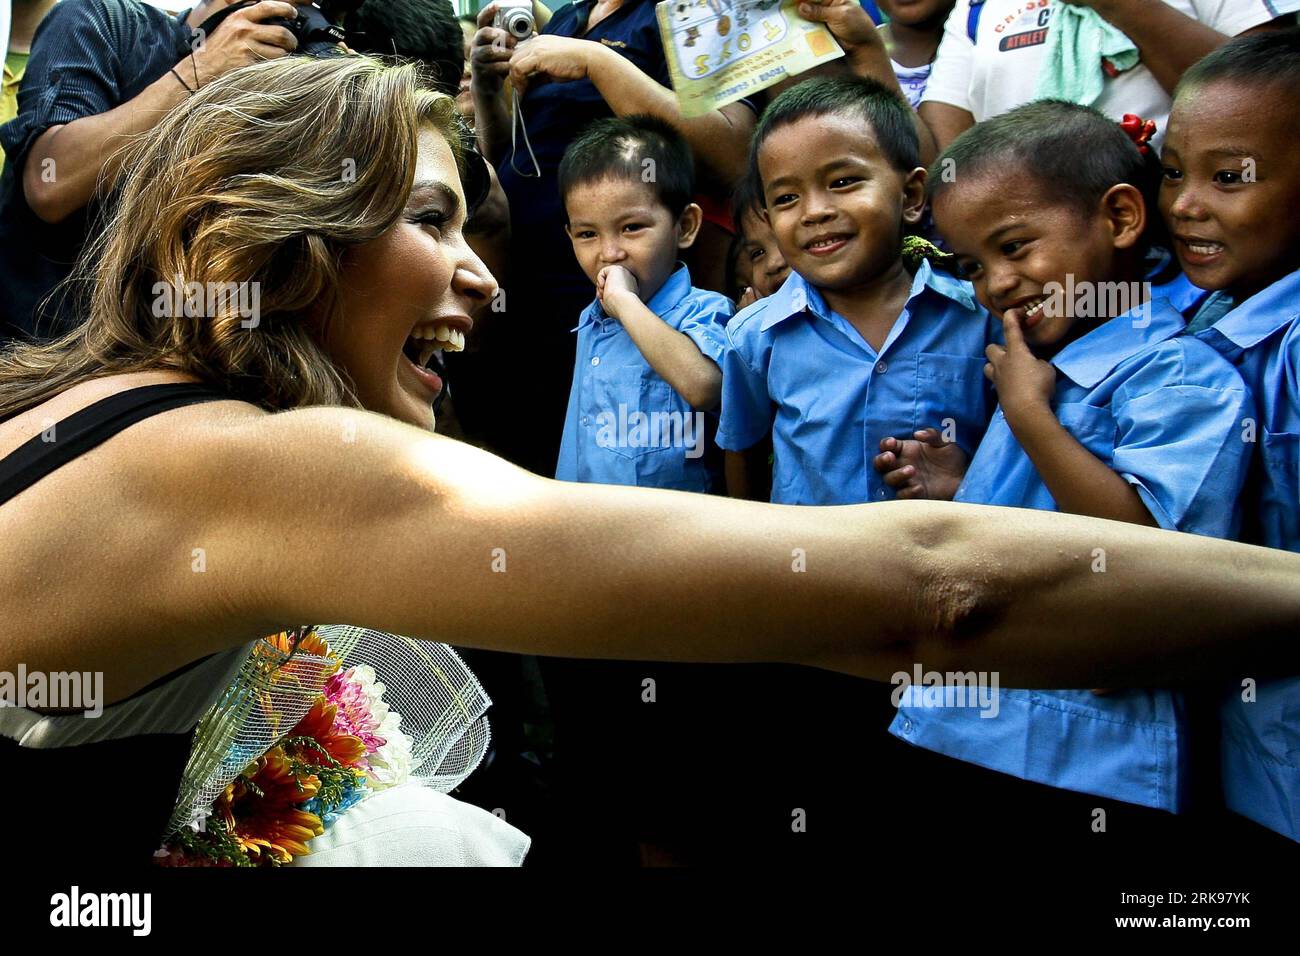 Bildnummer: 54149119  Datum: 16.06.2010  Copyright: imago/Xinhua (100616) -- MANILA, June 16, 2010 (Xinhua) -- Miss Universe 2008 Dayana Mendoza interacts with kids at a day care center in an outreach program where computer laptops are distributed in Tondo, Manila, the Philippines, June 16, 2010. Mendoza was chosen by Smartmatic Asia as Ambassador of Transparency to show the company s gratitude to all those who helped them with the Philippine elections. (Xinhua/Jon Fabrigar)(zl) (2)THE PHILIPPINES-MANILA-MISS UNIVERSE PUBLICATIONxNOTxINxCHN Gesellschaft kbdig xkg 2010 quer o00 People    Bildnu Stock Photo